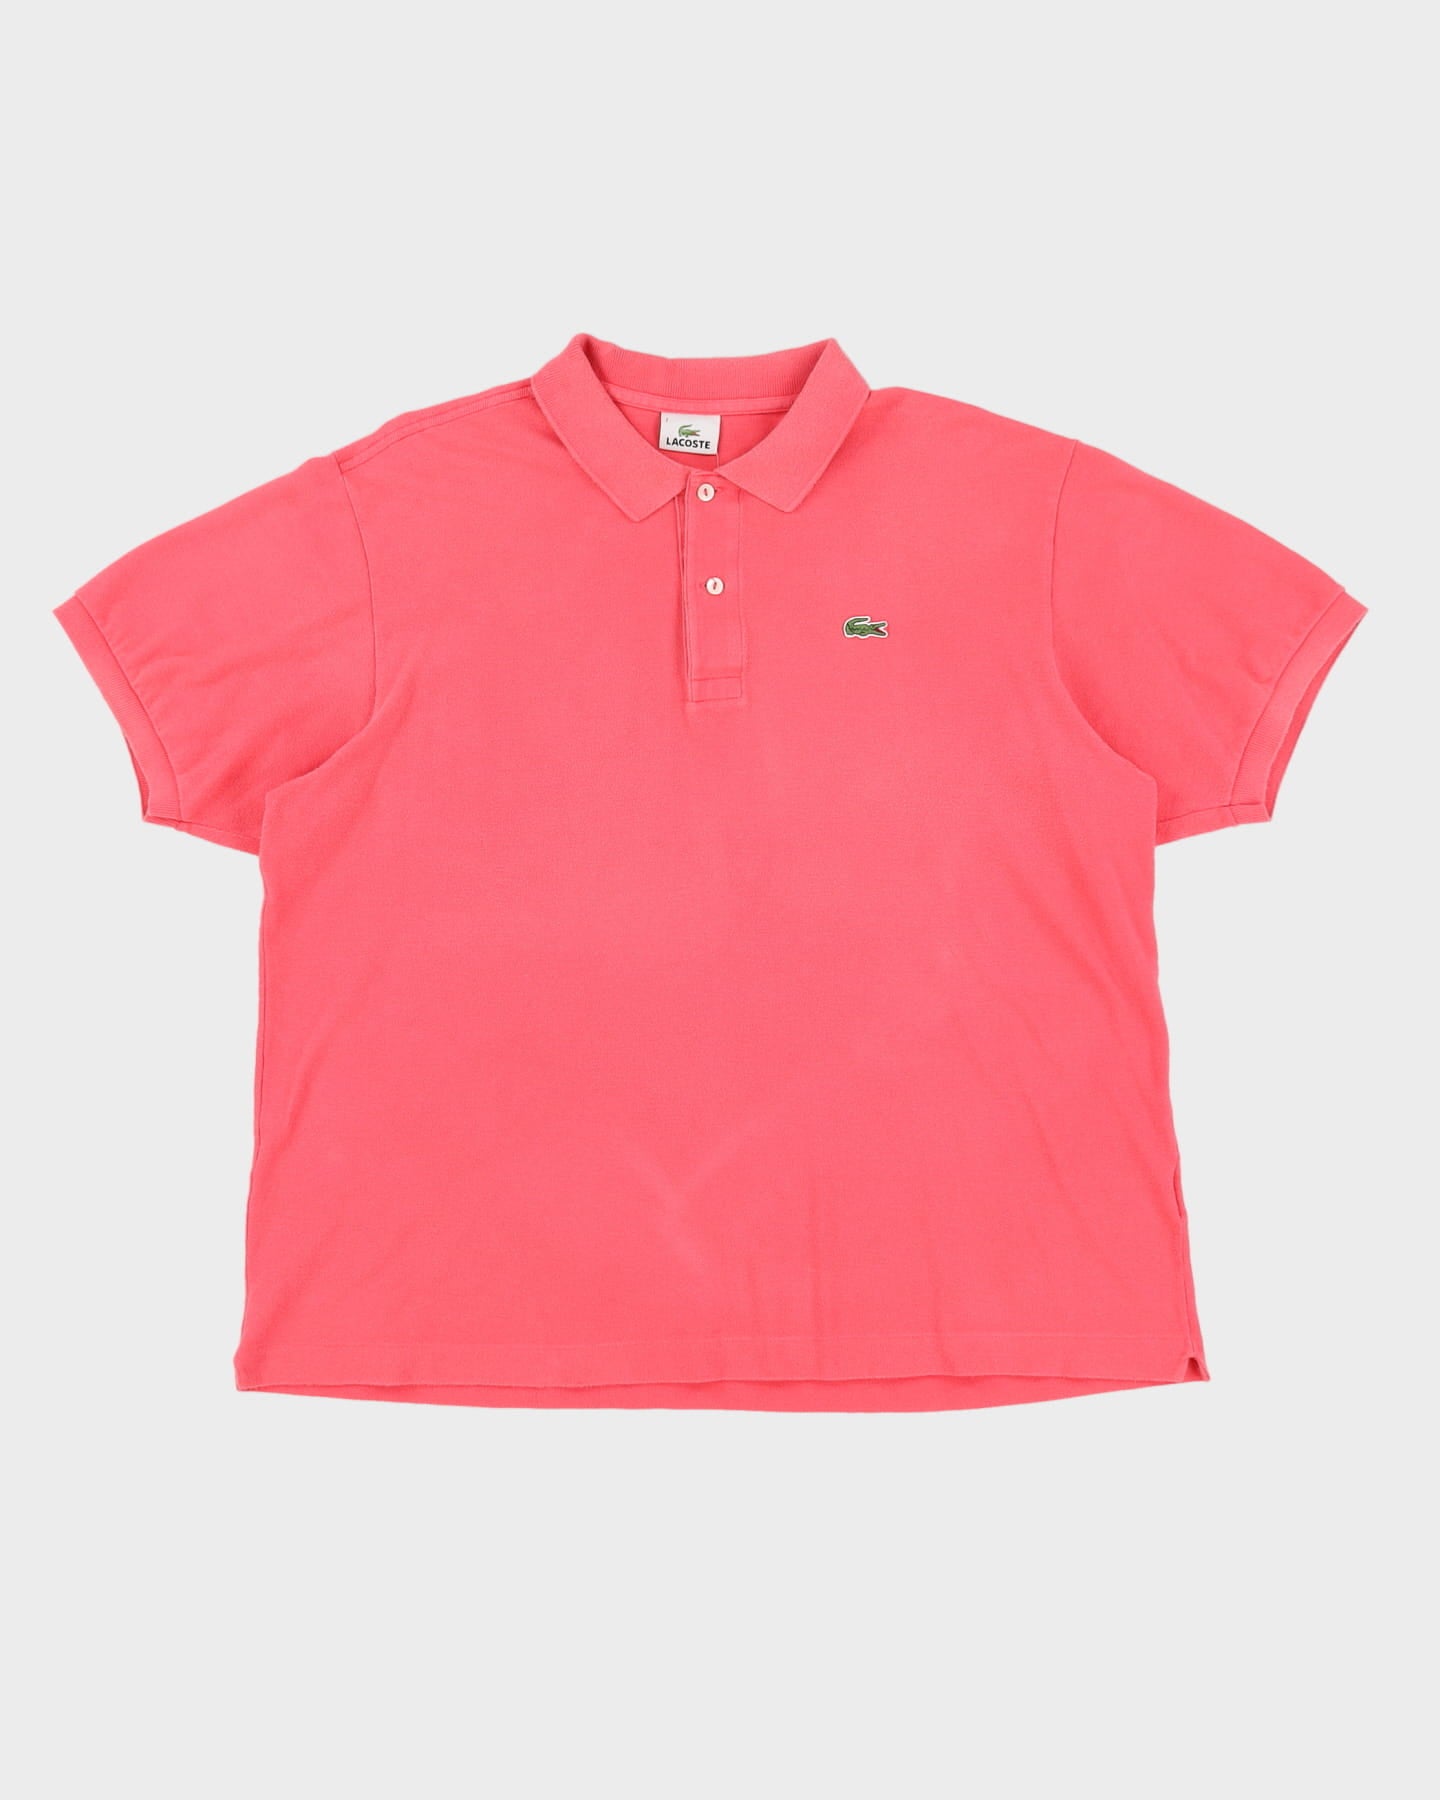 Lacoste Pink Polo Shirt - XL